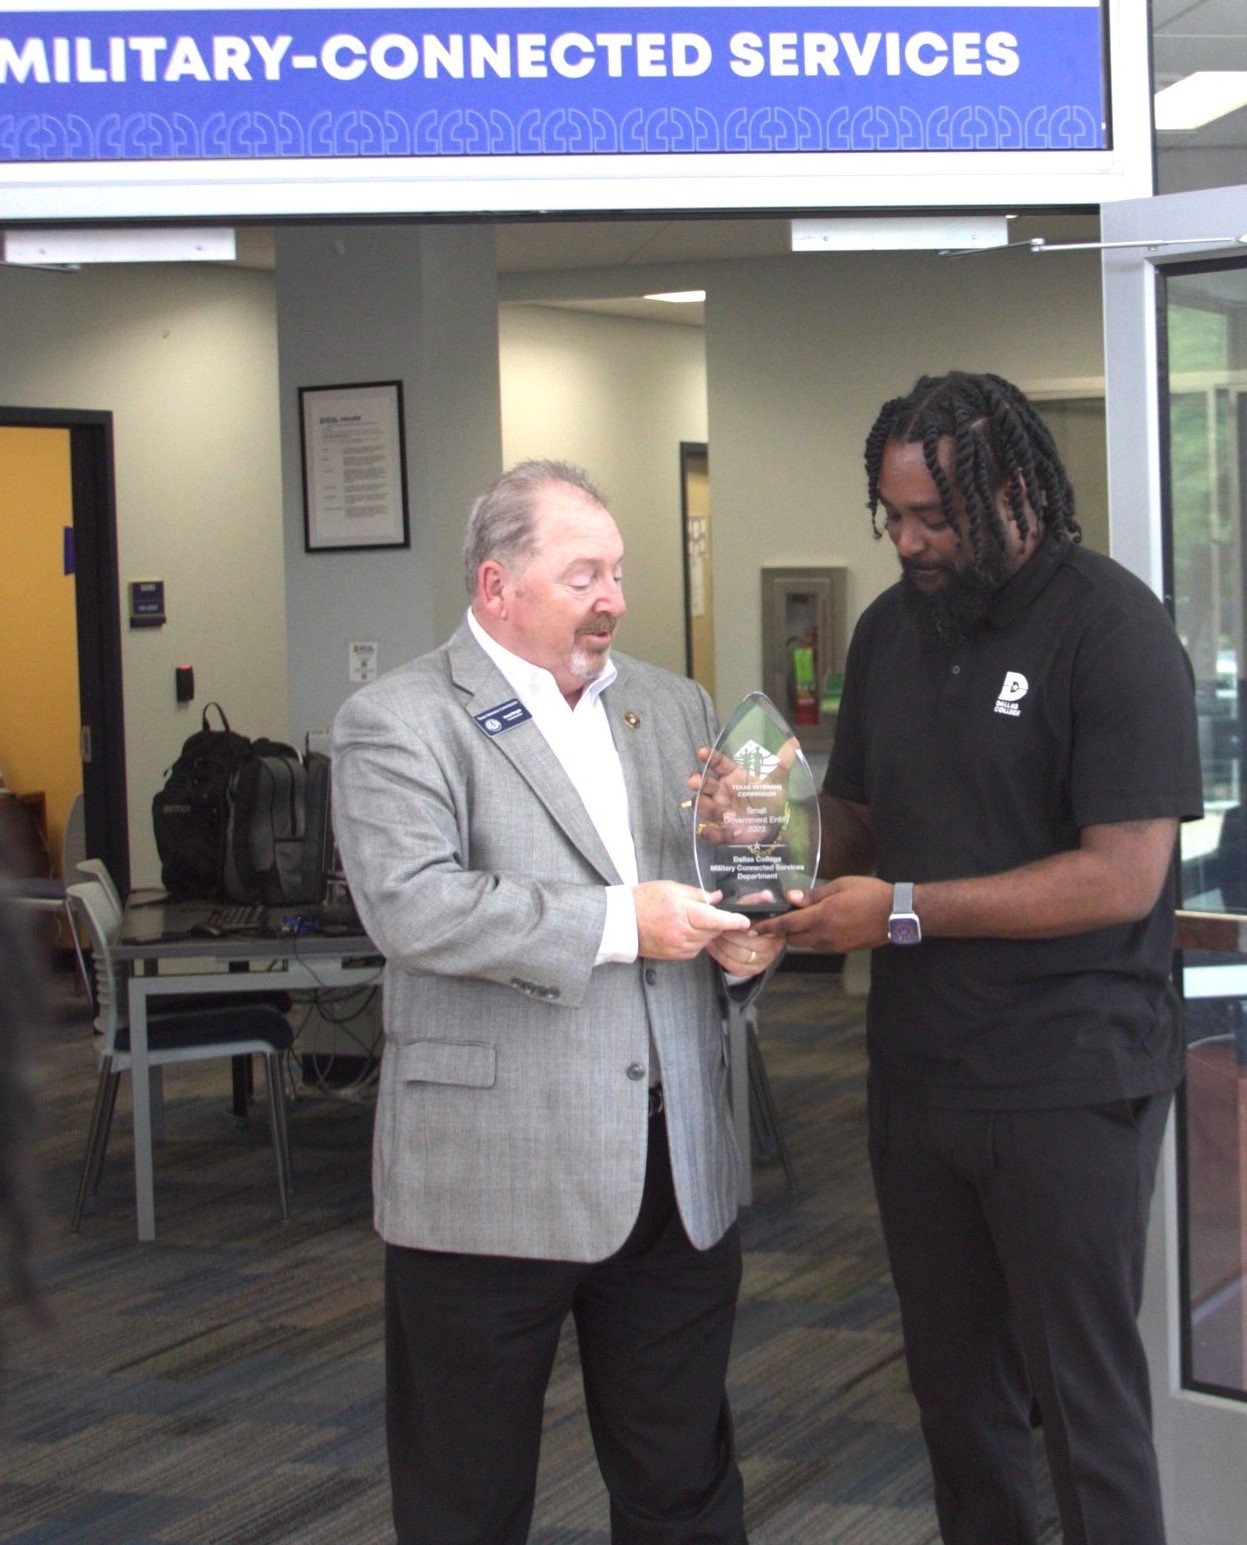 TVC Commissioner Wright presents the Veteran Employer award to Dallas College - Veteran Connected Services Department